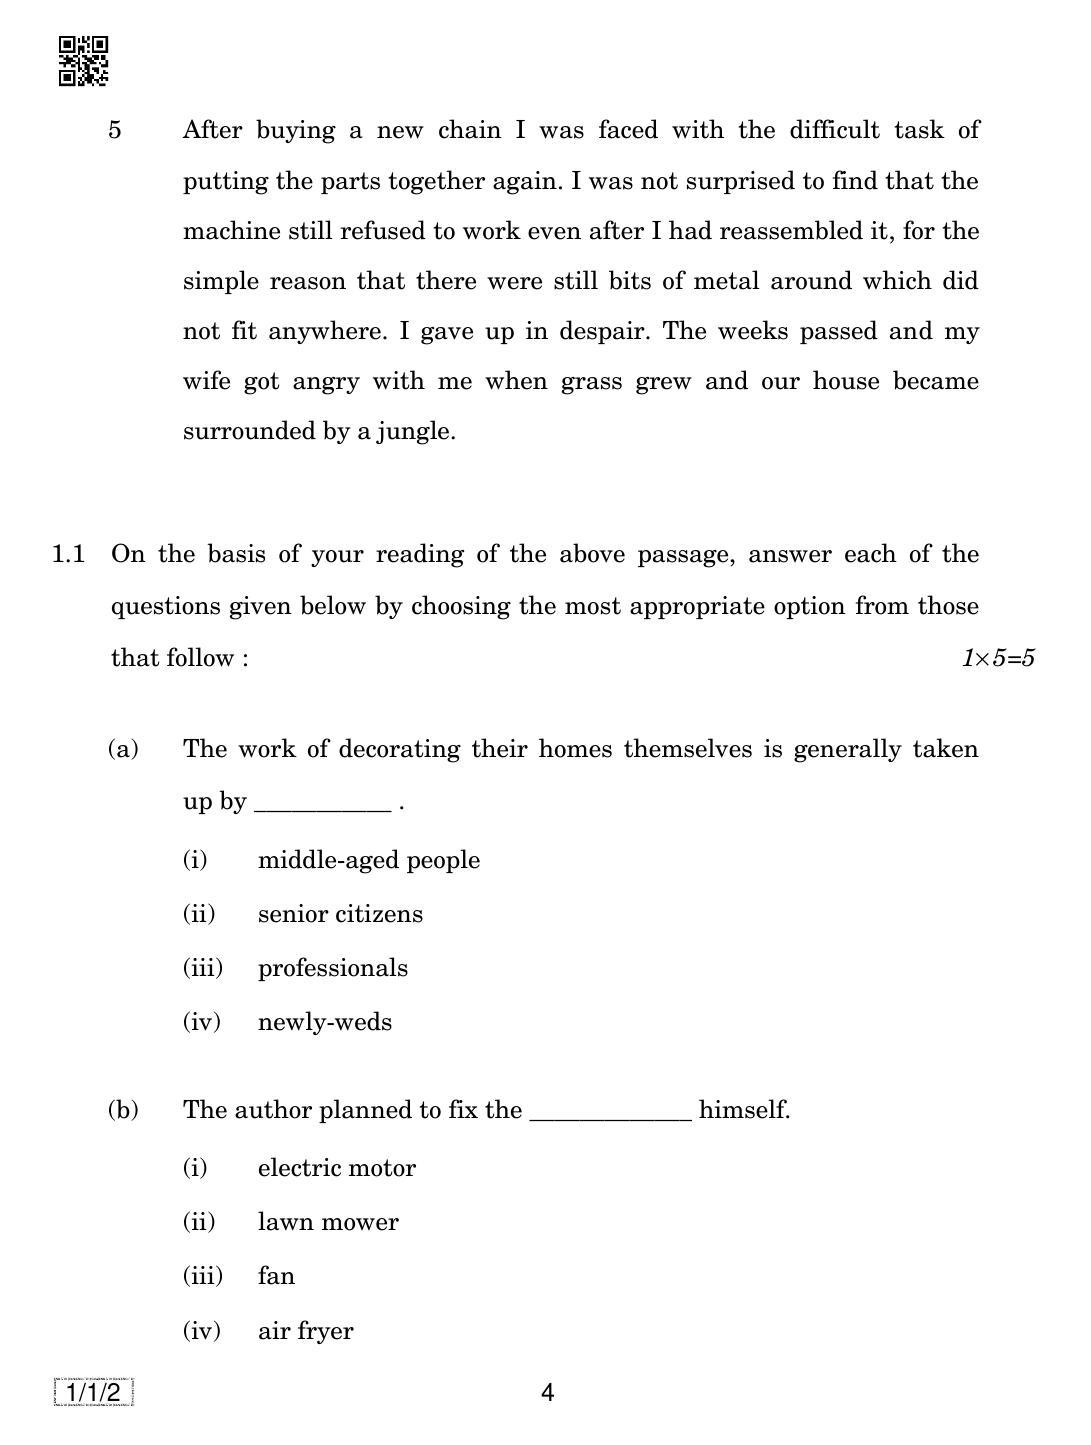 CBSE Class 12 1-1-2 ENGLISH CORE 2019 Compartment Question Paper - Page 4